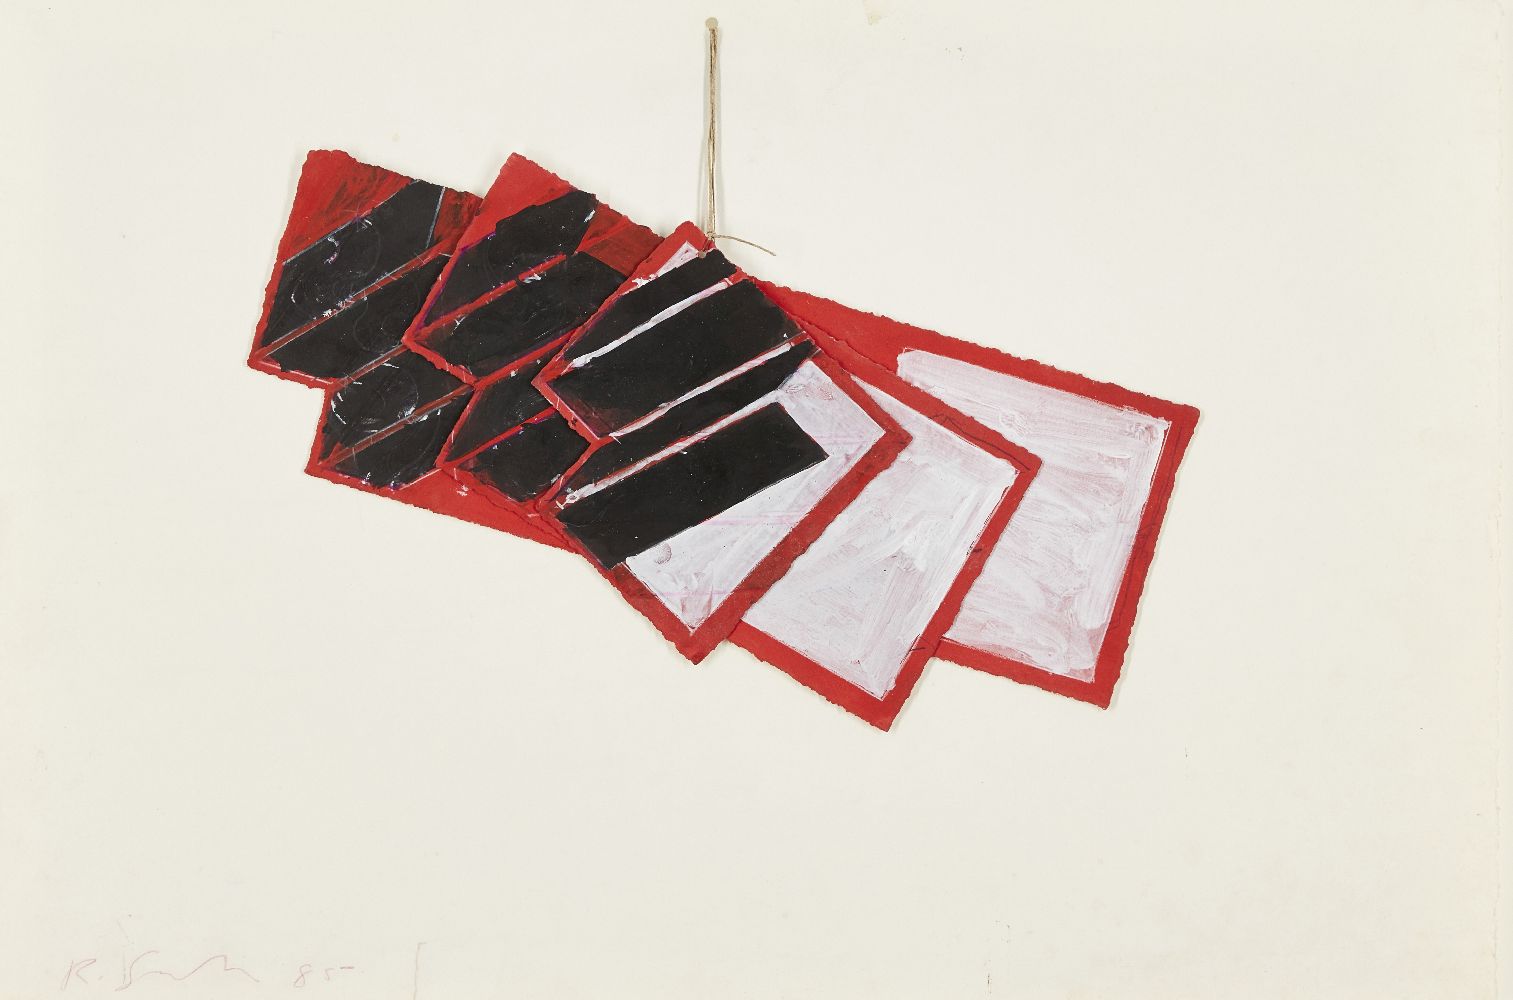 Richard Smith CBE, British 1931-2016- Hanging study; mixed media, 1985; signed and dated in red,